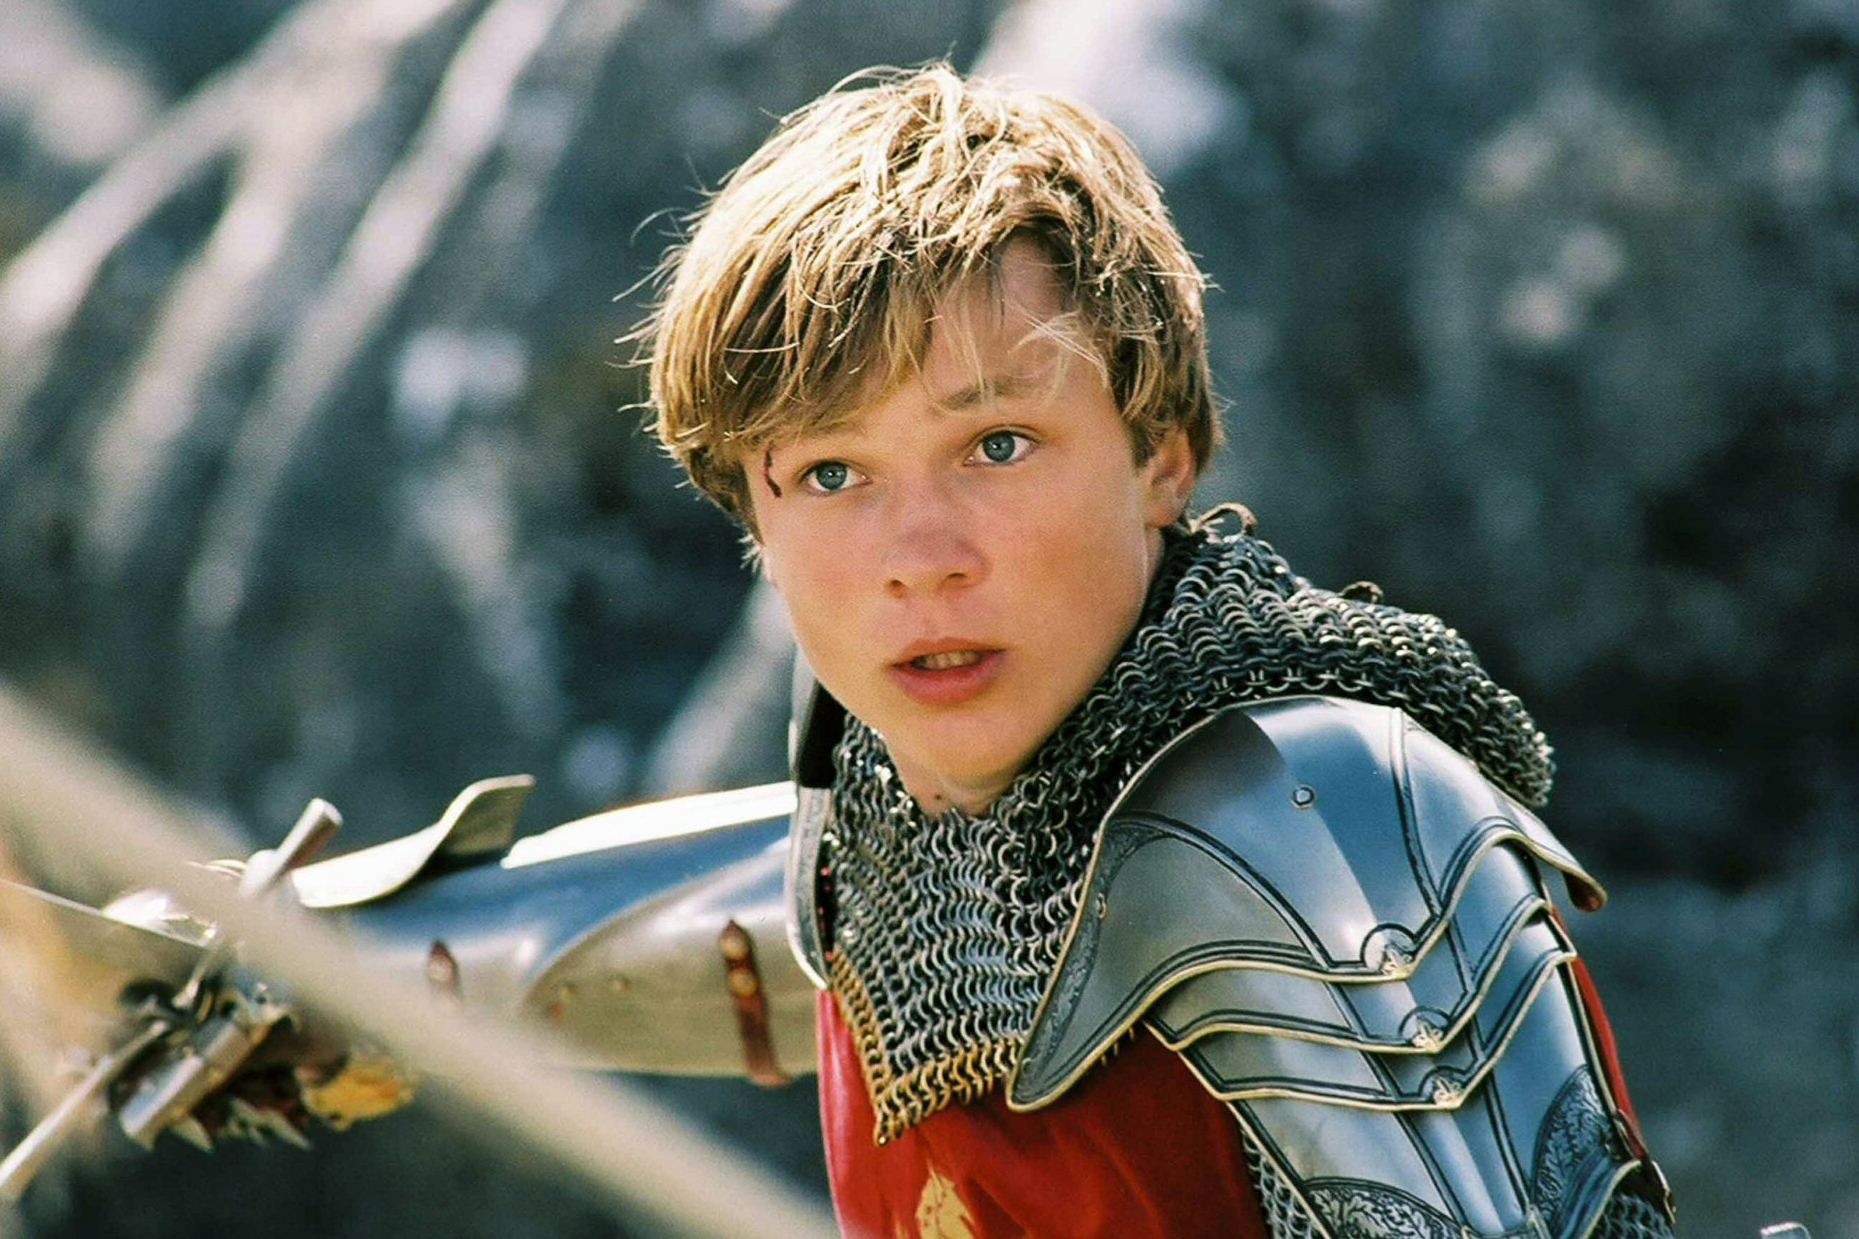 William Moseley as Peter Pevensie in <i>The Chronicles of Narnia: The Lion, the Witch and the Wardrobe</i>. (Walt Disney Pictures)